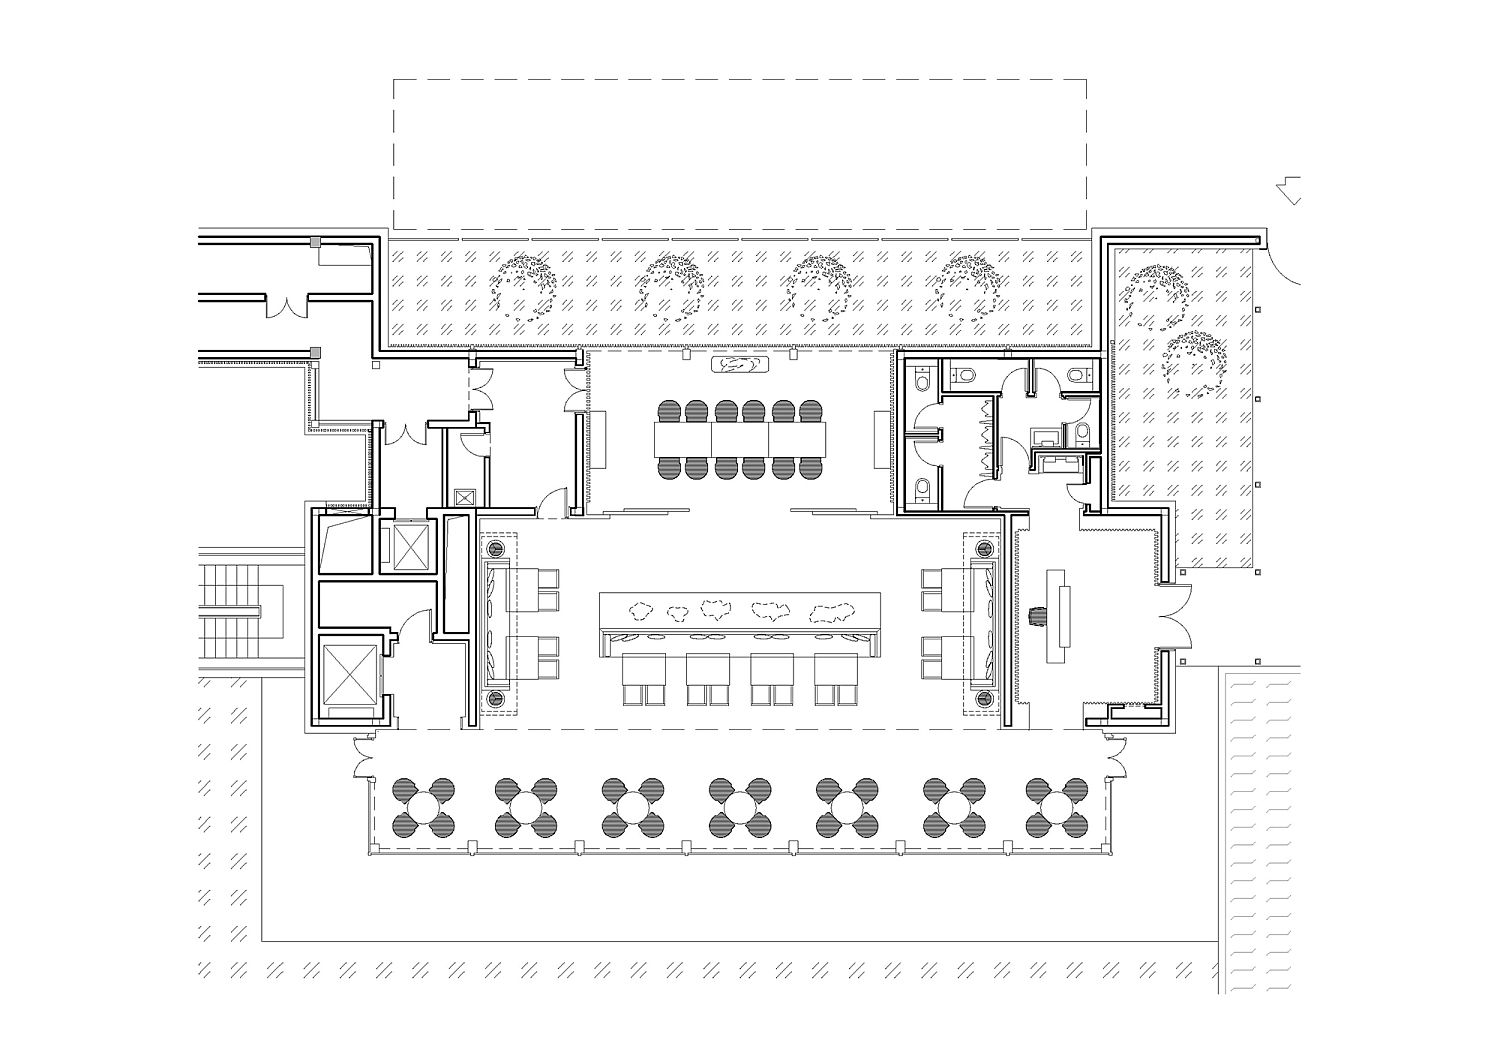 Floor plan of the Modern Tea House in China